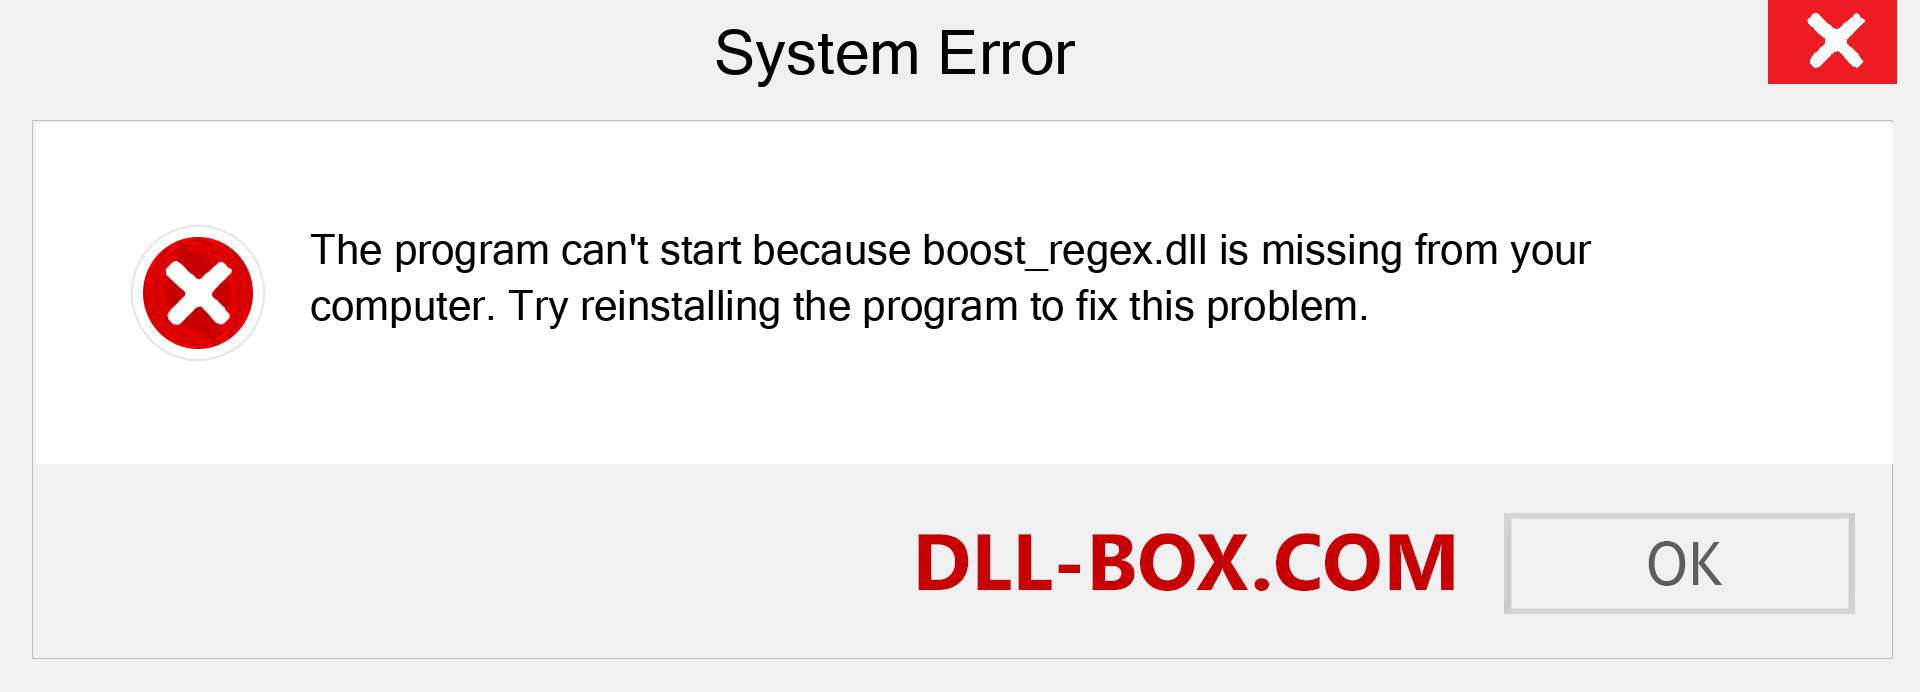  boost_regex.dll file is missing?. Download for Windows 7, 8, 10 - Fix  boost_regex dll Missing Error on Windows, photos, images